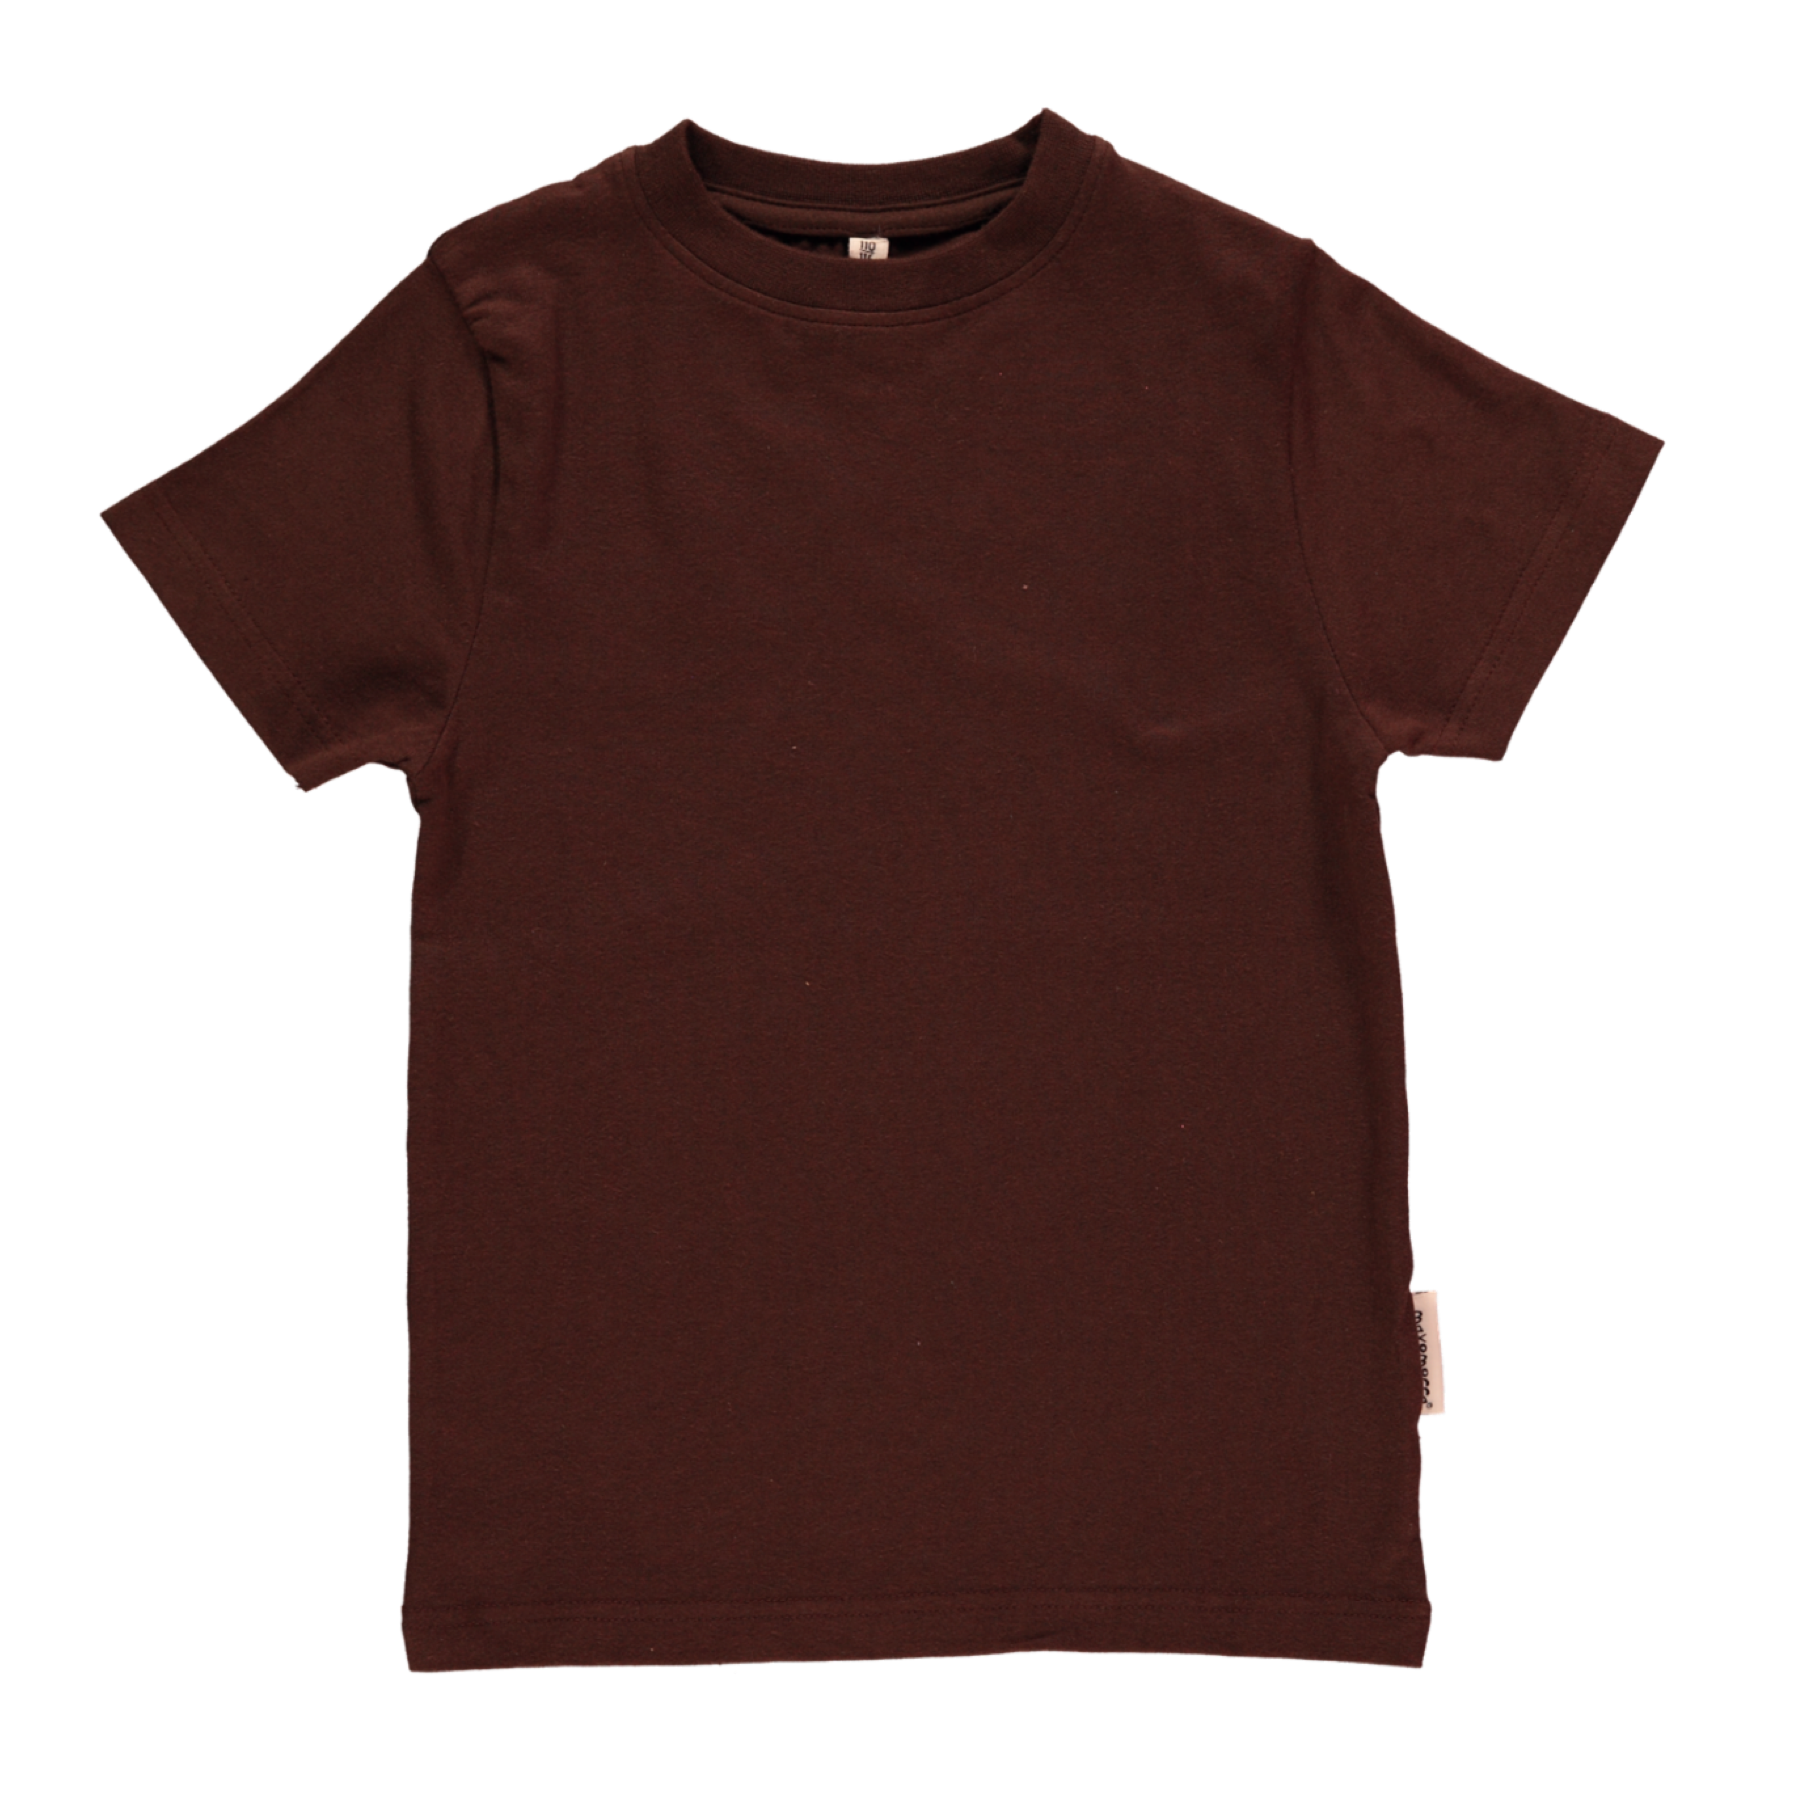 Maxomorra Top SS Brown,little-tiger-togs.